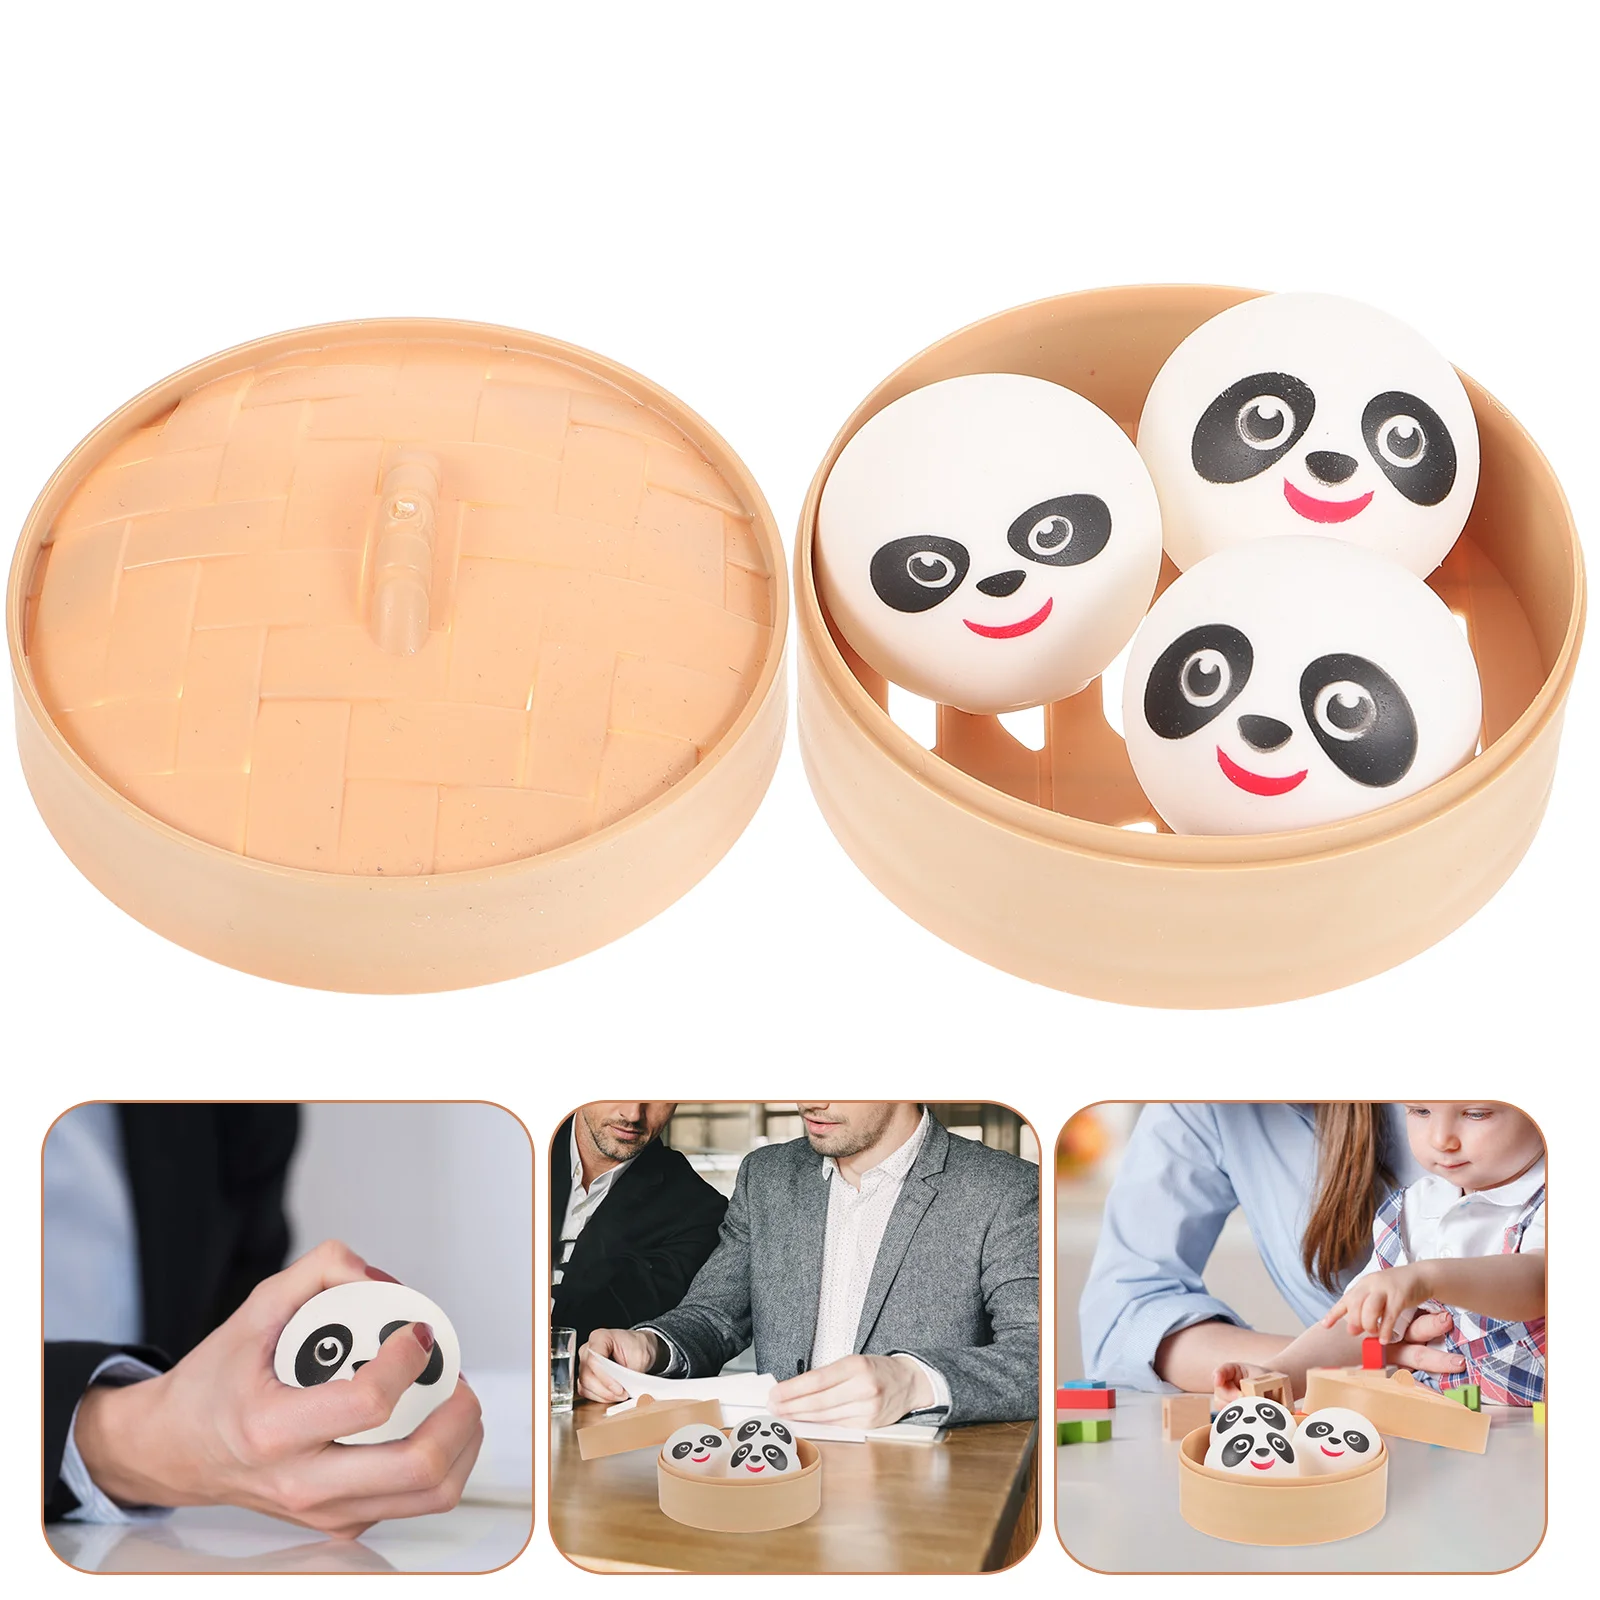 

Mini Toys Kids Simulated Buns Decompression Steamed Stuffed Simulation Squeeze Child Antistress compressed